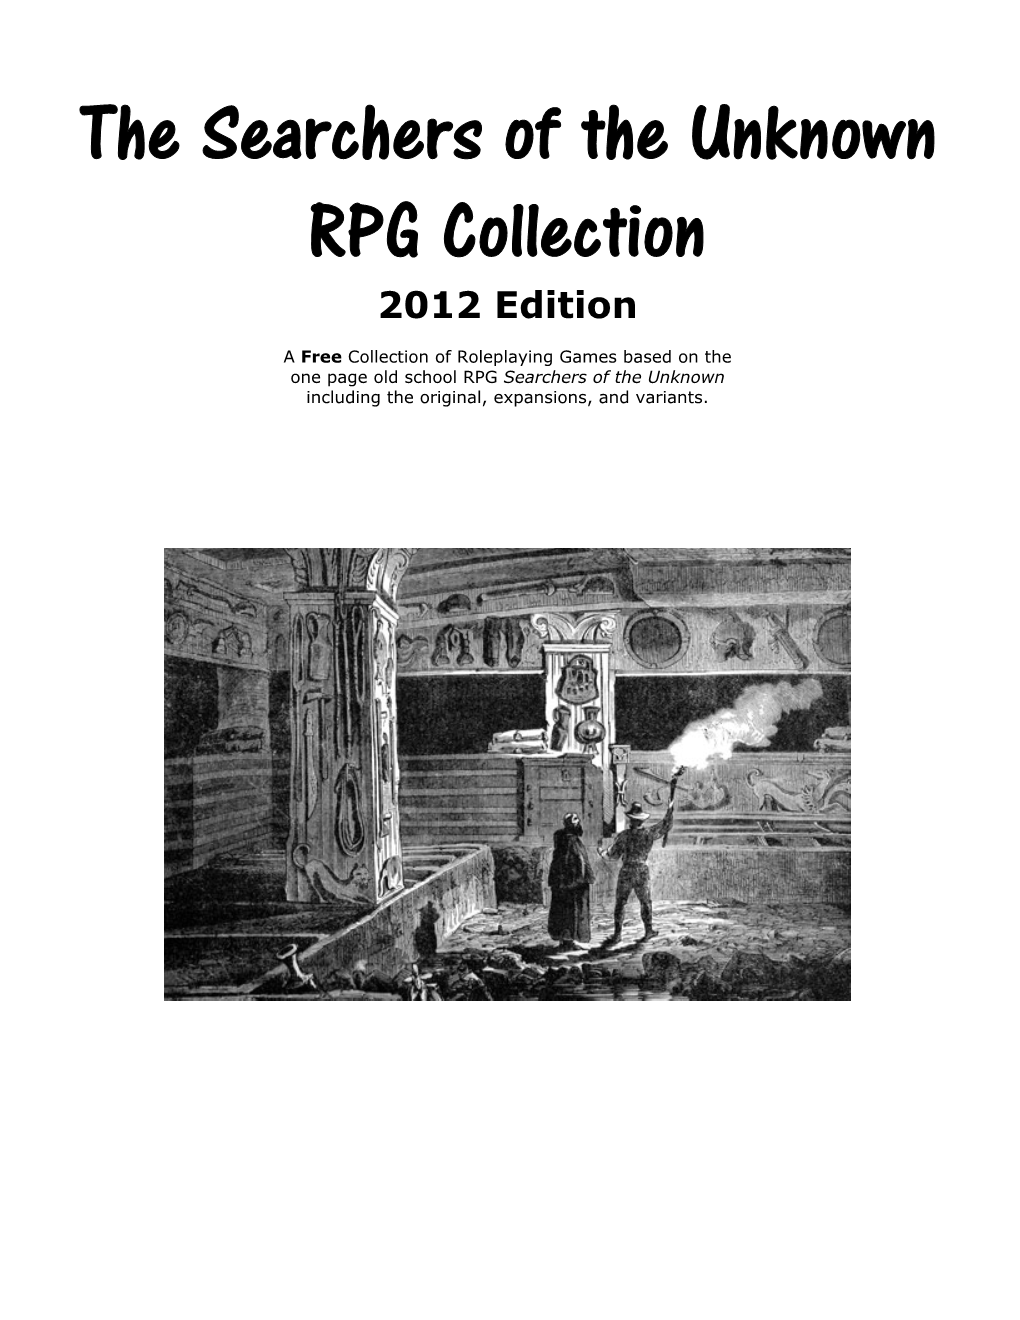 The Searchers of the Unknown RPG Collection 2012 Edition